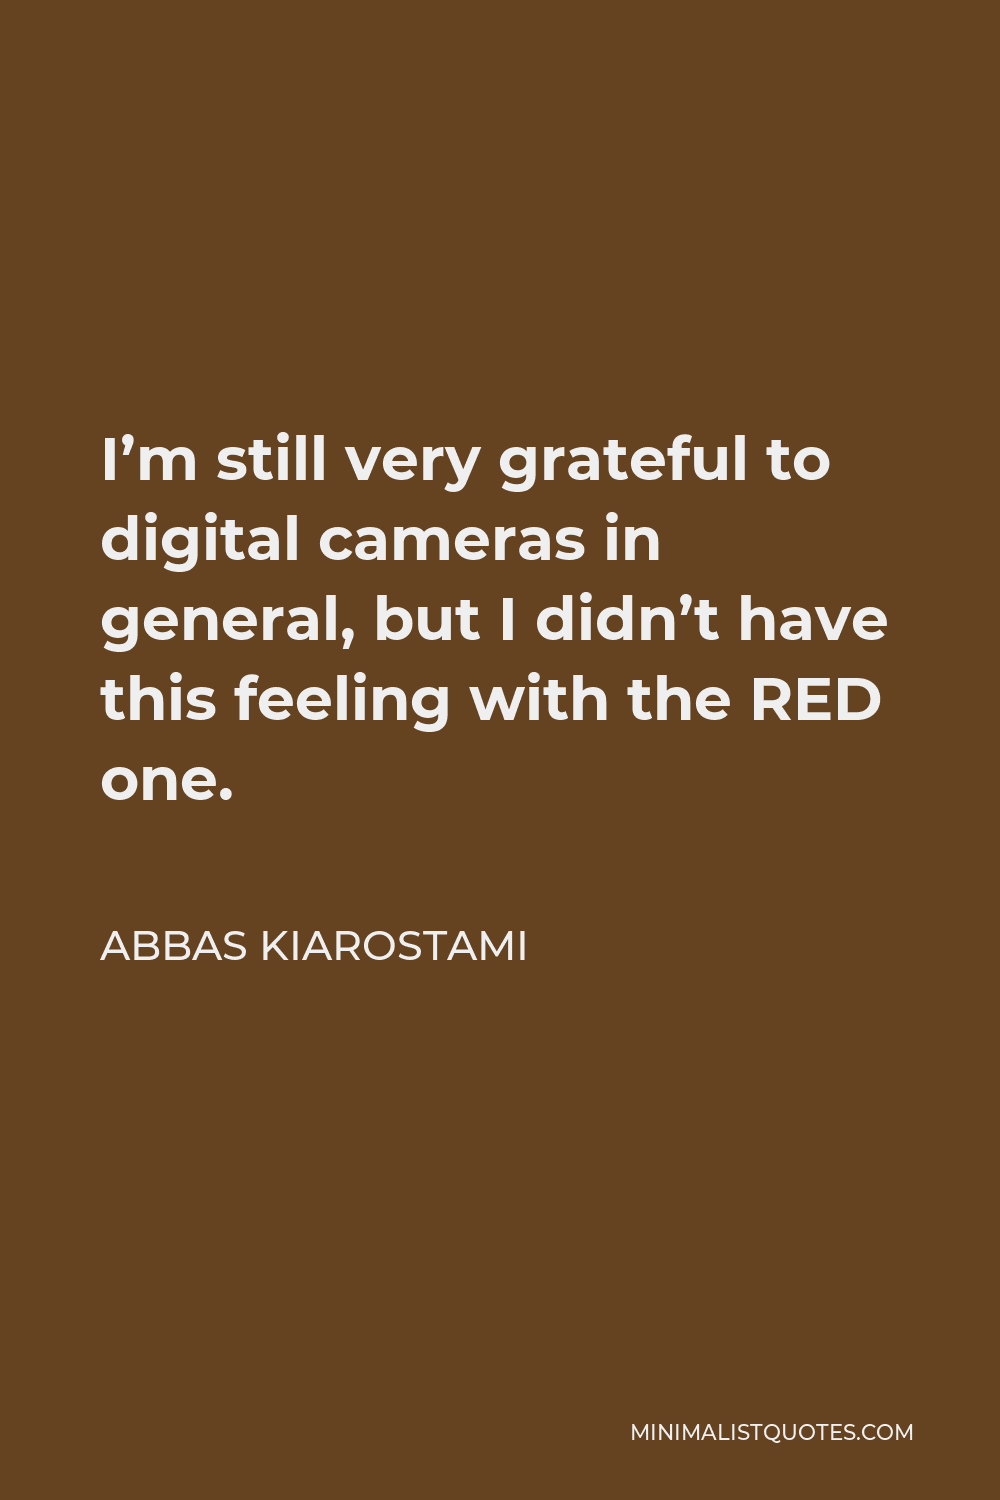 Abbas Kiarostami Quote - I’m still very grateful to digital cameras in general, but I didn’t have this feeling with the RED one.